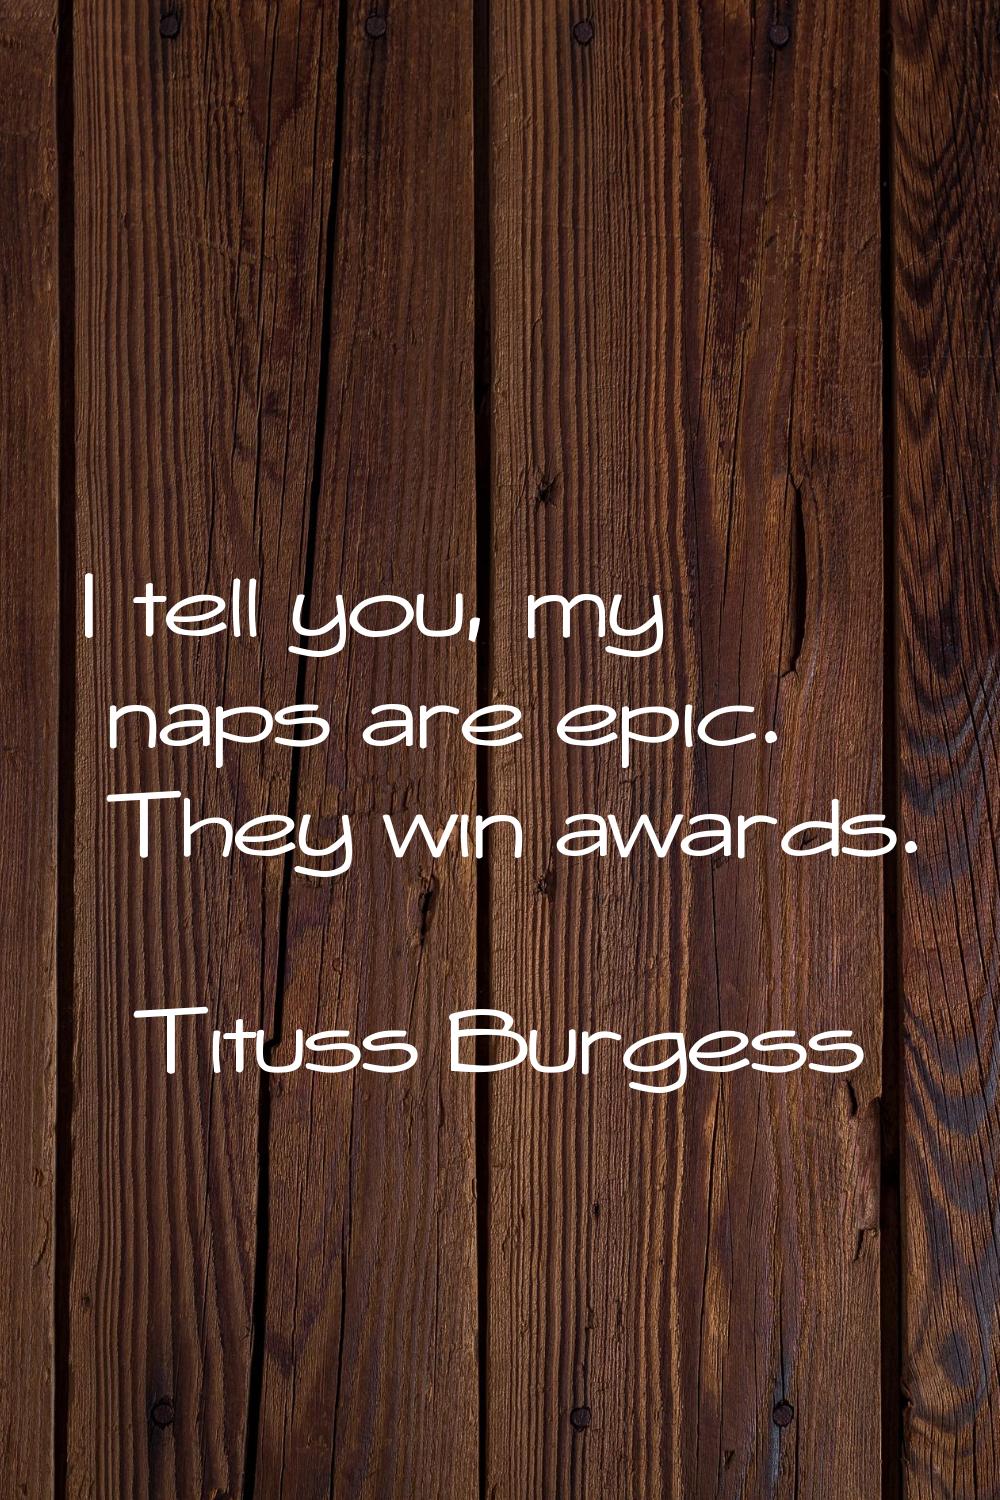 I tell you, my naps are epic. They win awards.